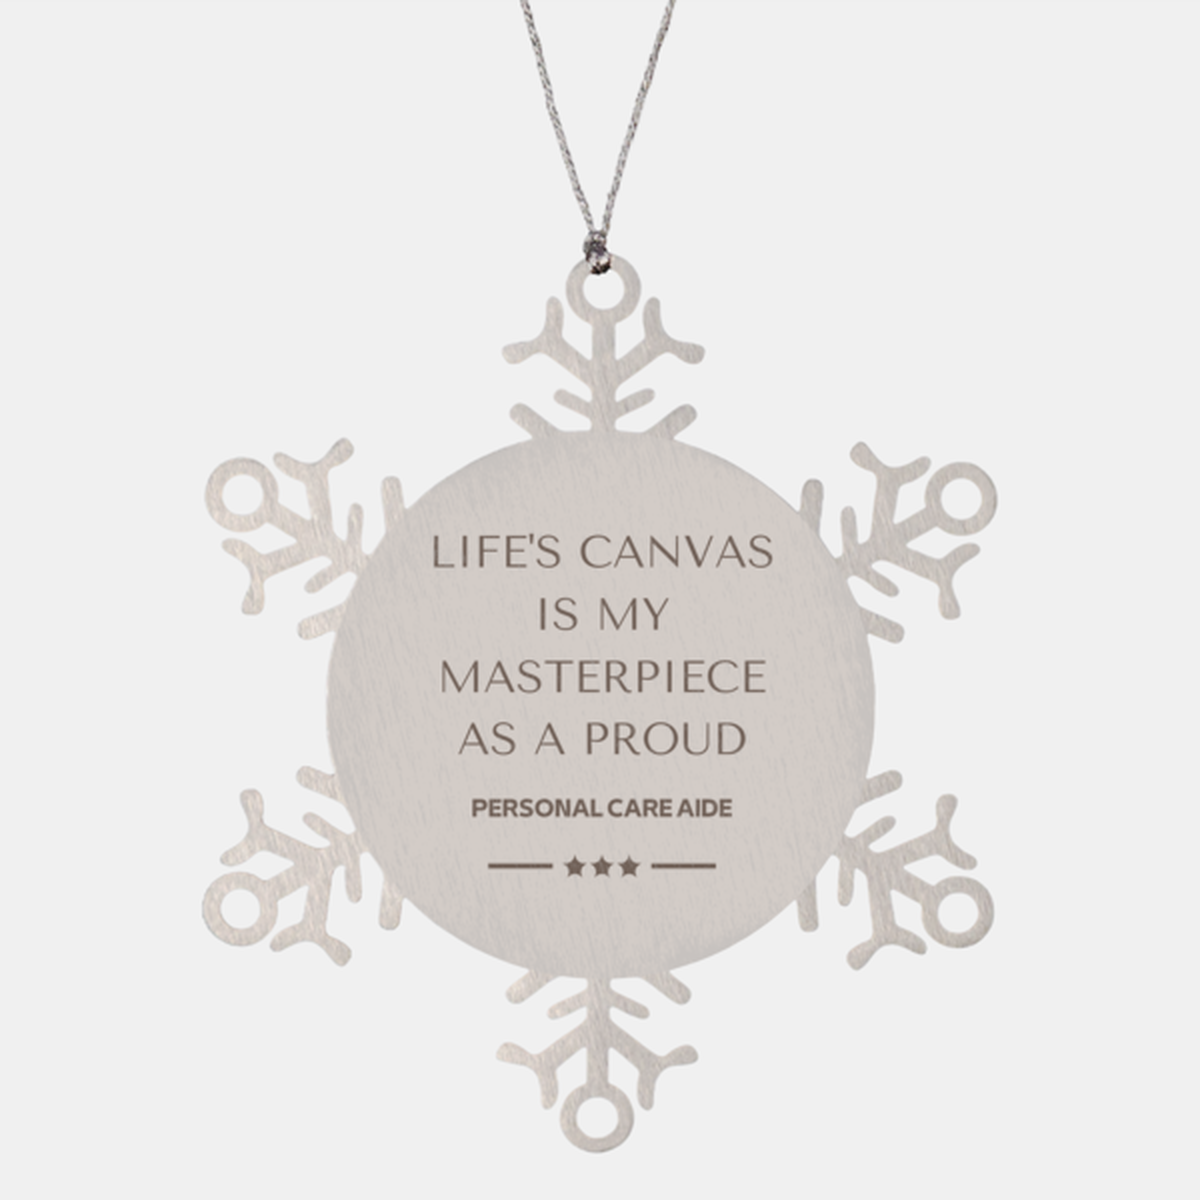 Proud Personal Care Aide Gifts, Life's canvas is my masterpiece, Epic Birthday Christmas Unique Snowflake Ornament For Personal Care Aide, Coworkers, Men, Women, Friends